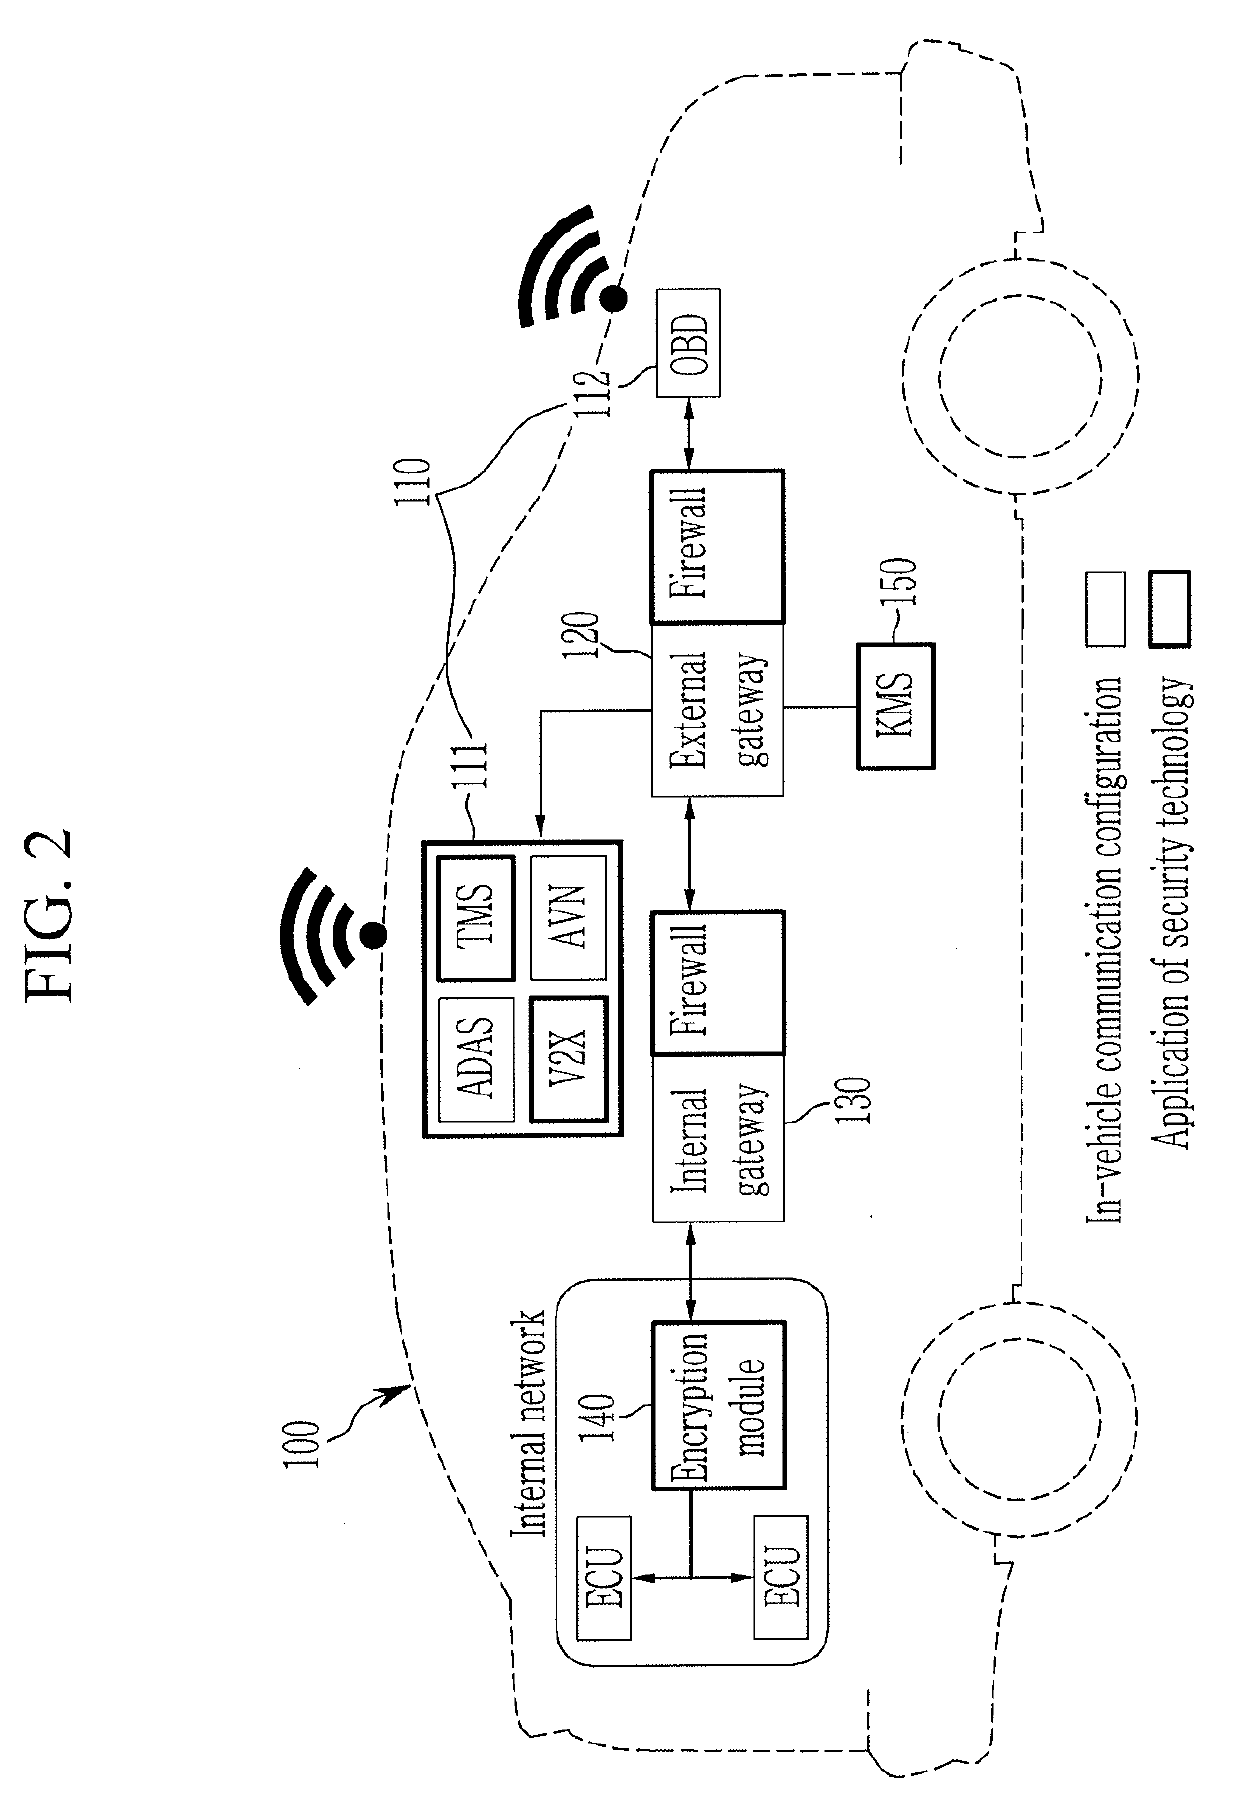 System and method for security inspection of electronic equipment